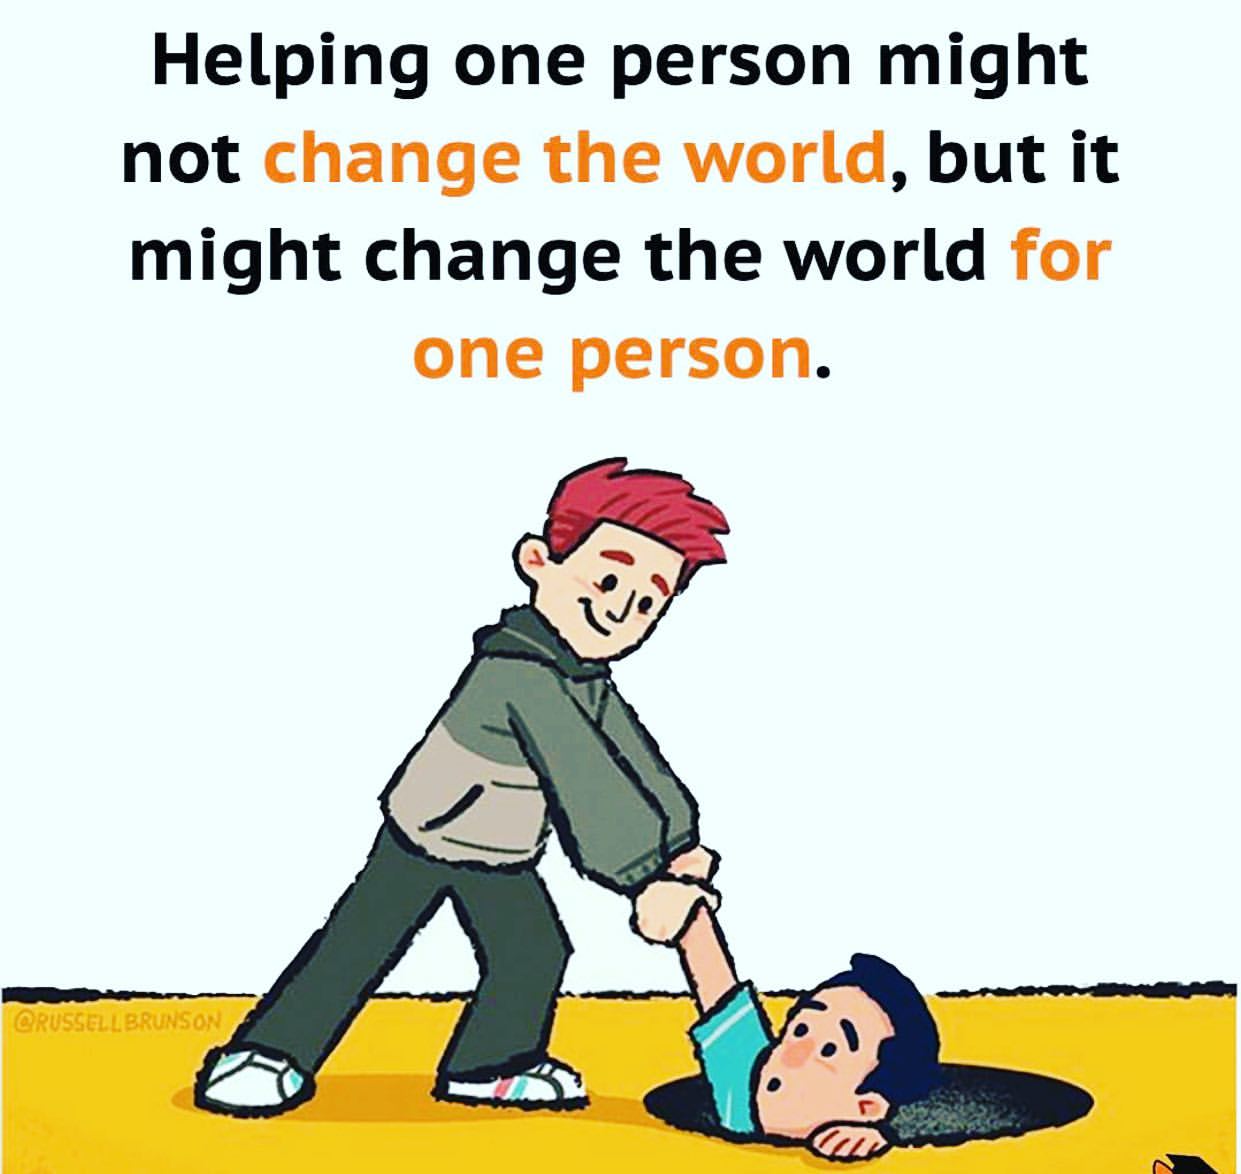 Helping one person might change the world, but it not might change the world for one person.